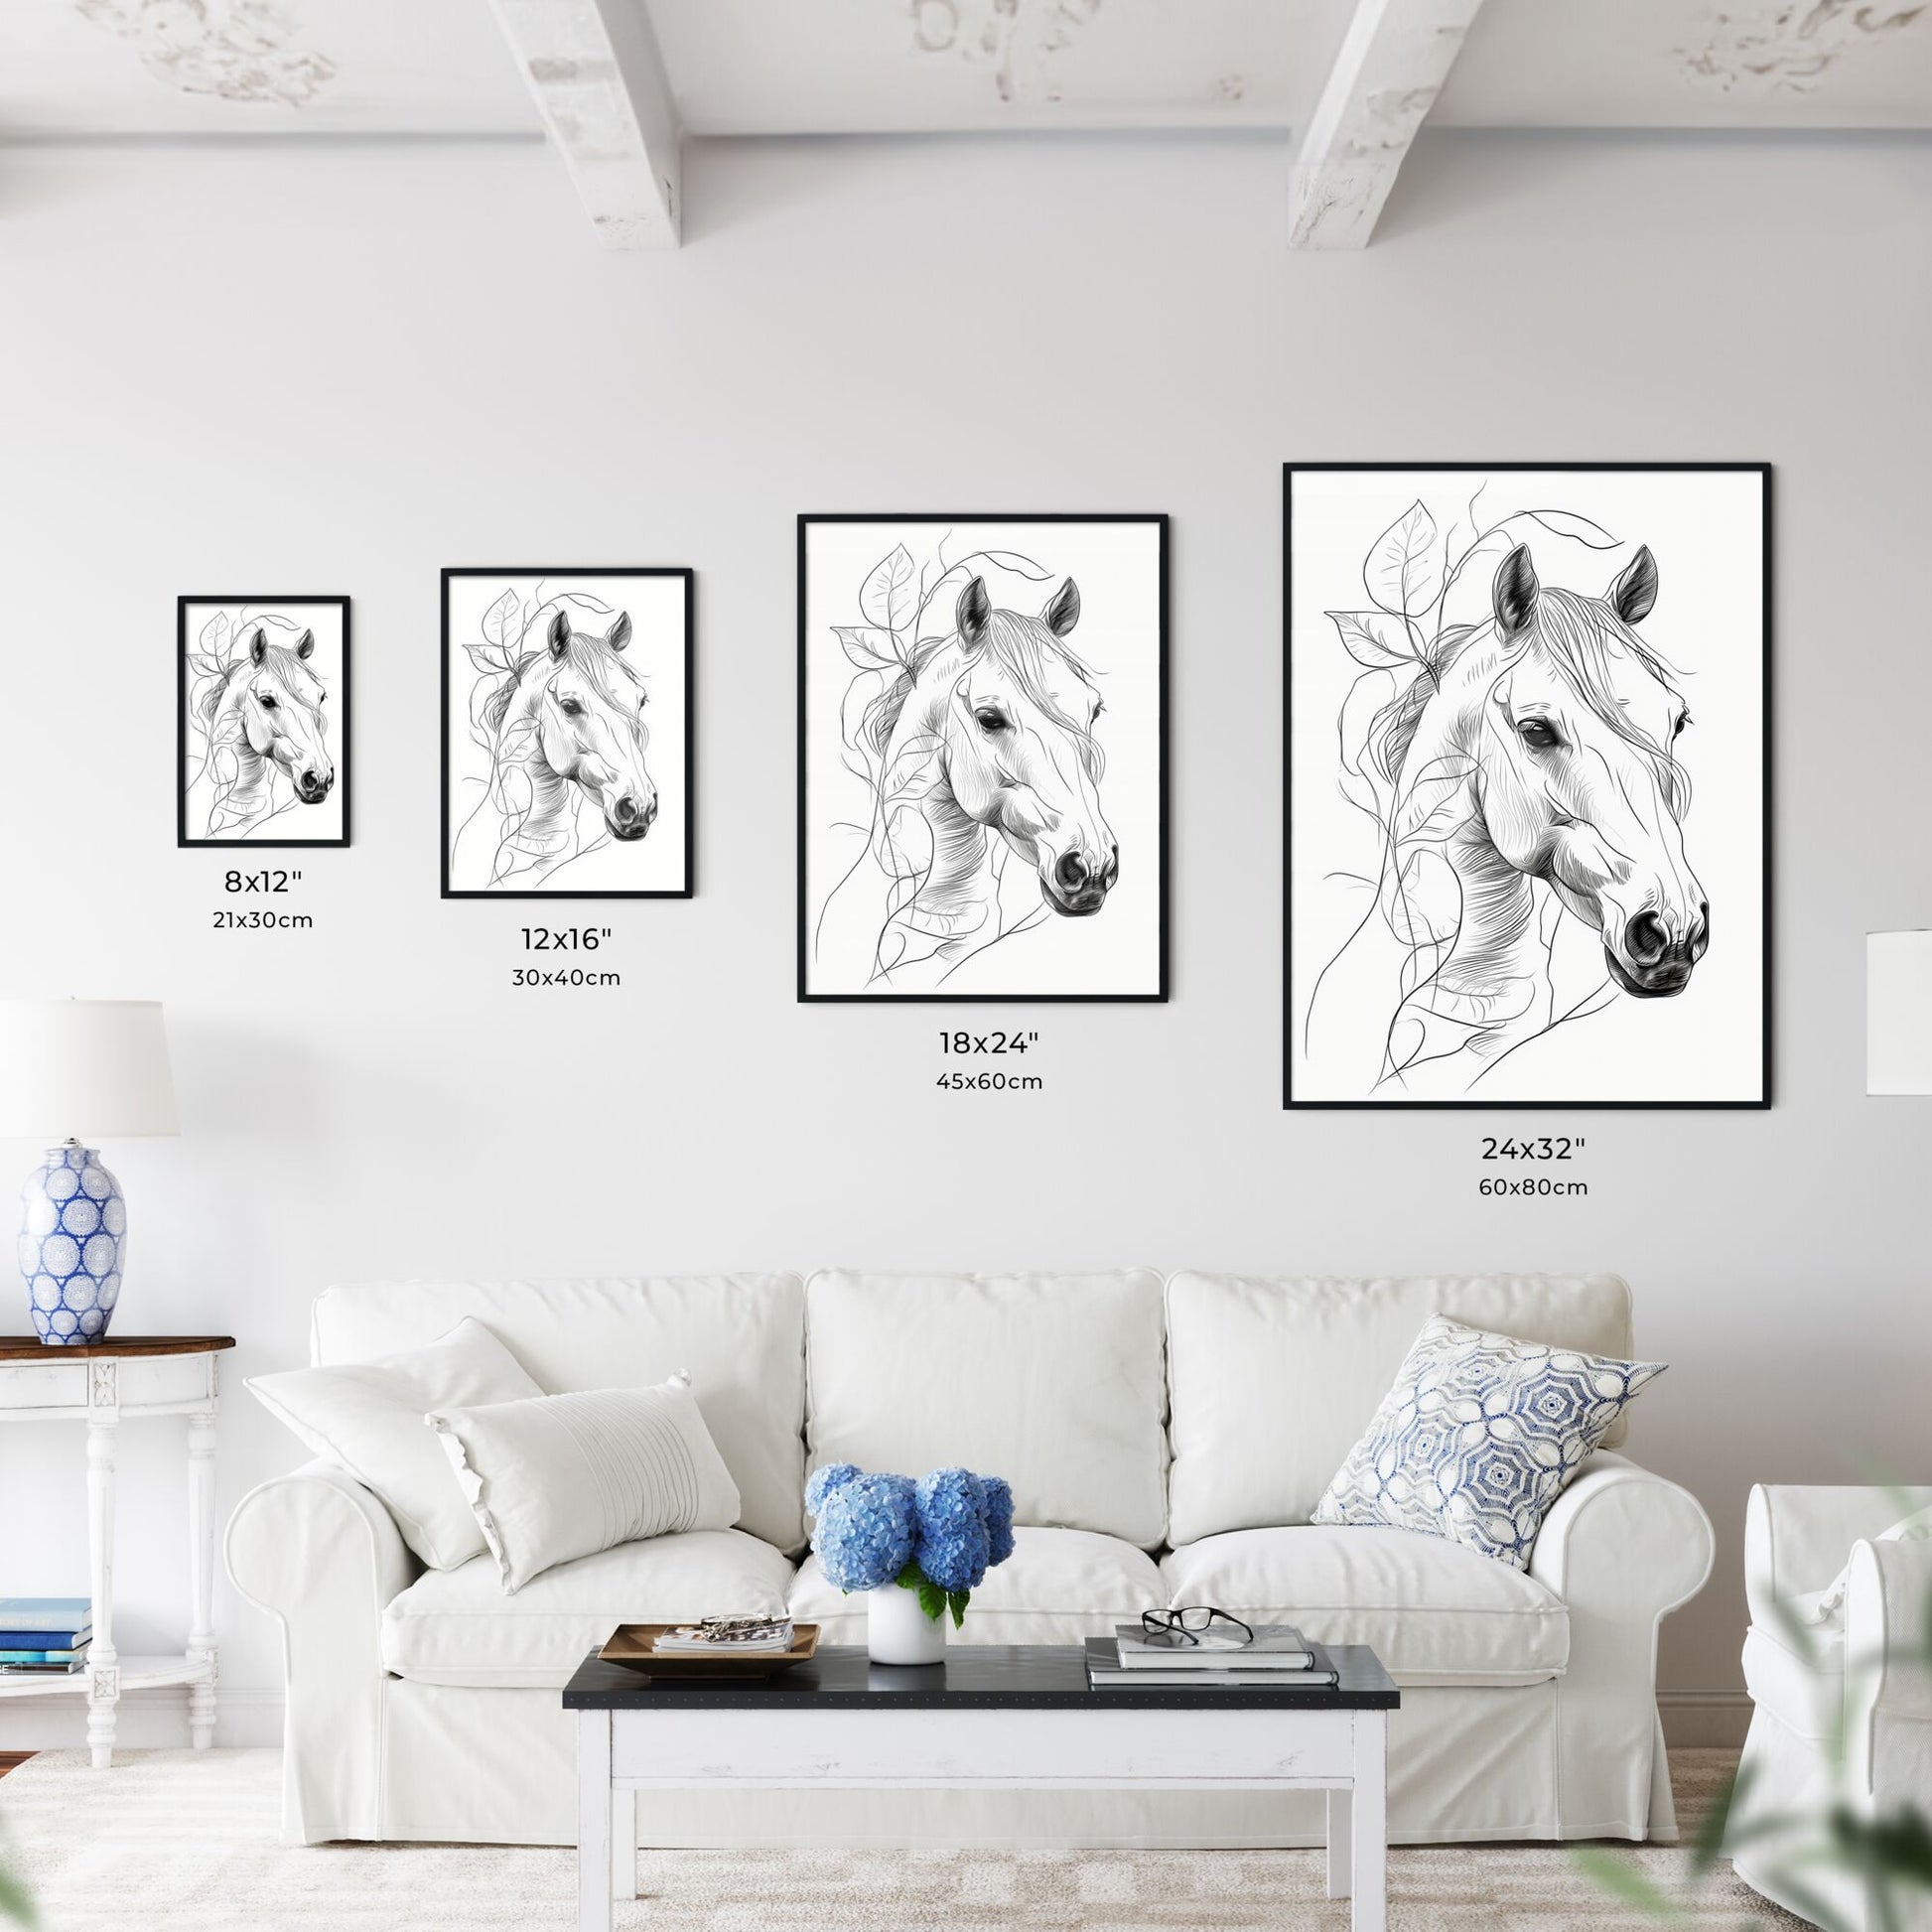 A Poster of a line art drawing of a horses face - A Drawing Of A Horse Default Title